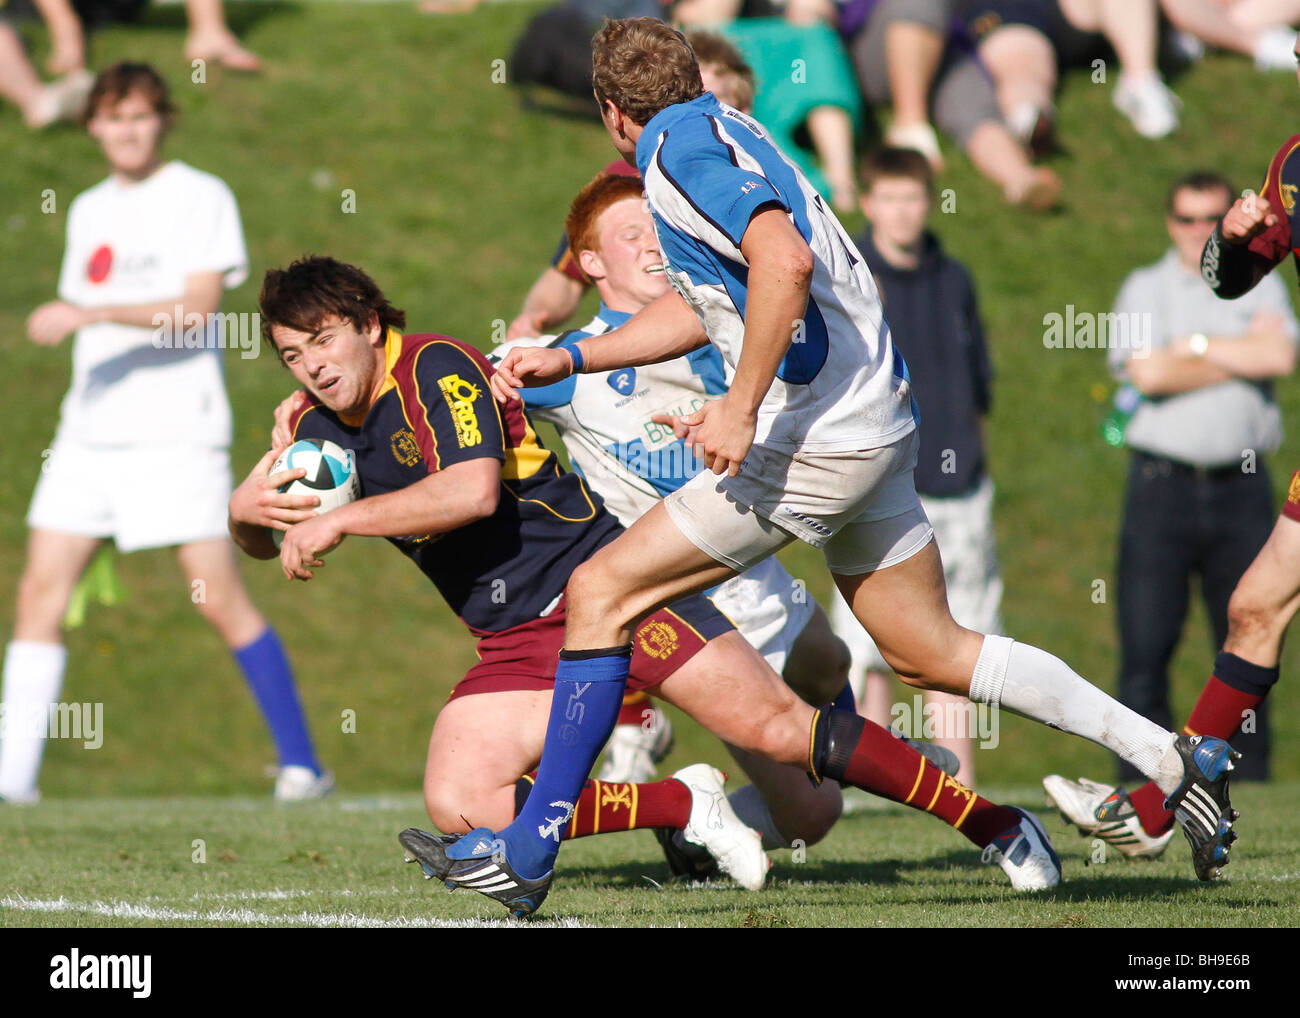 A rugby player dives over to score a try for his team. Stock Photo